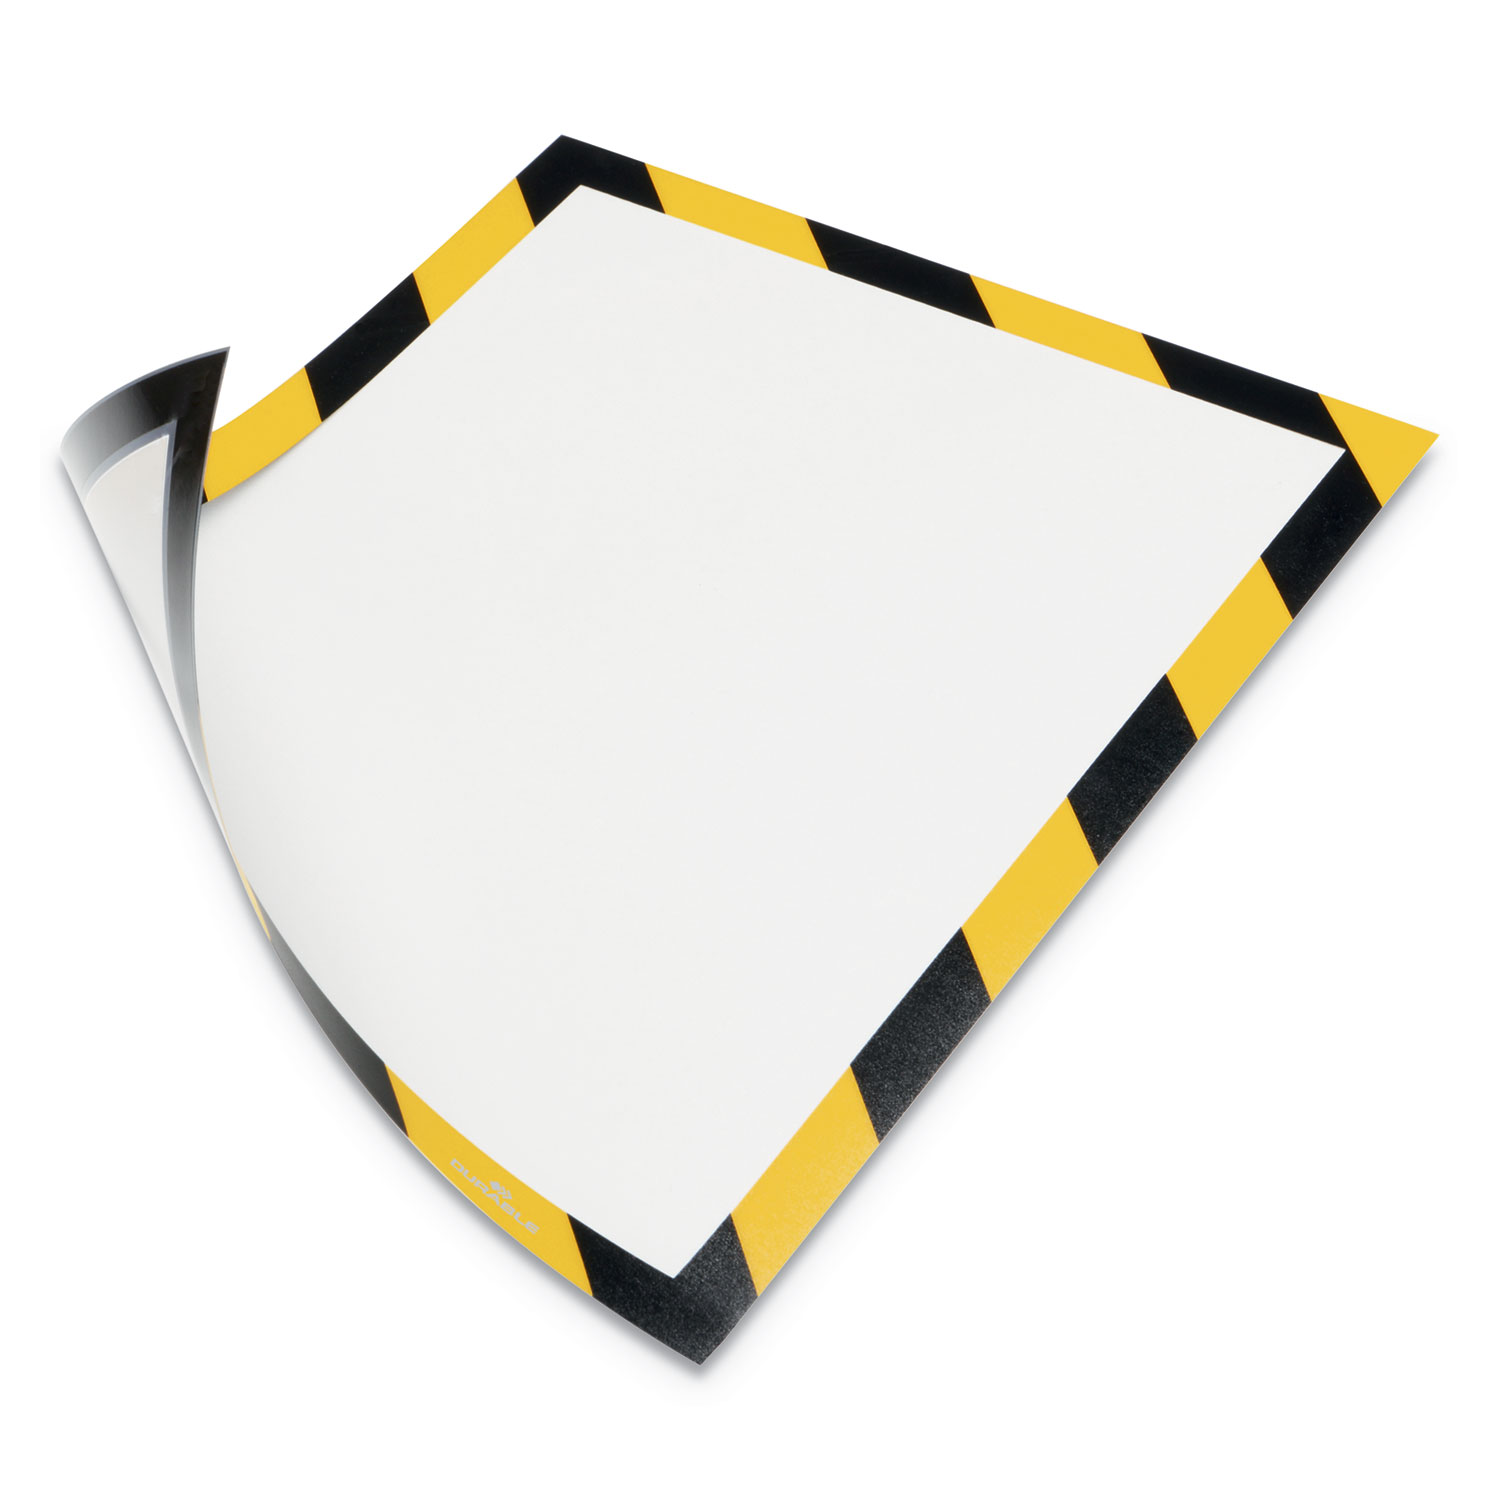  Durable 4772130 DURAFRAME Security Magnetic Sign Holder, 8 1/2 x 11, Yellow/Black Frame, 2/Pack (DBL4772130) 